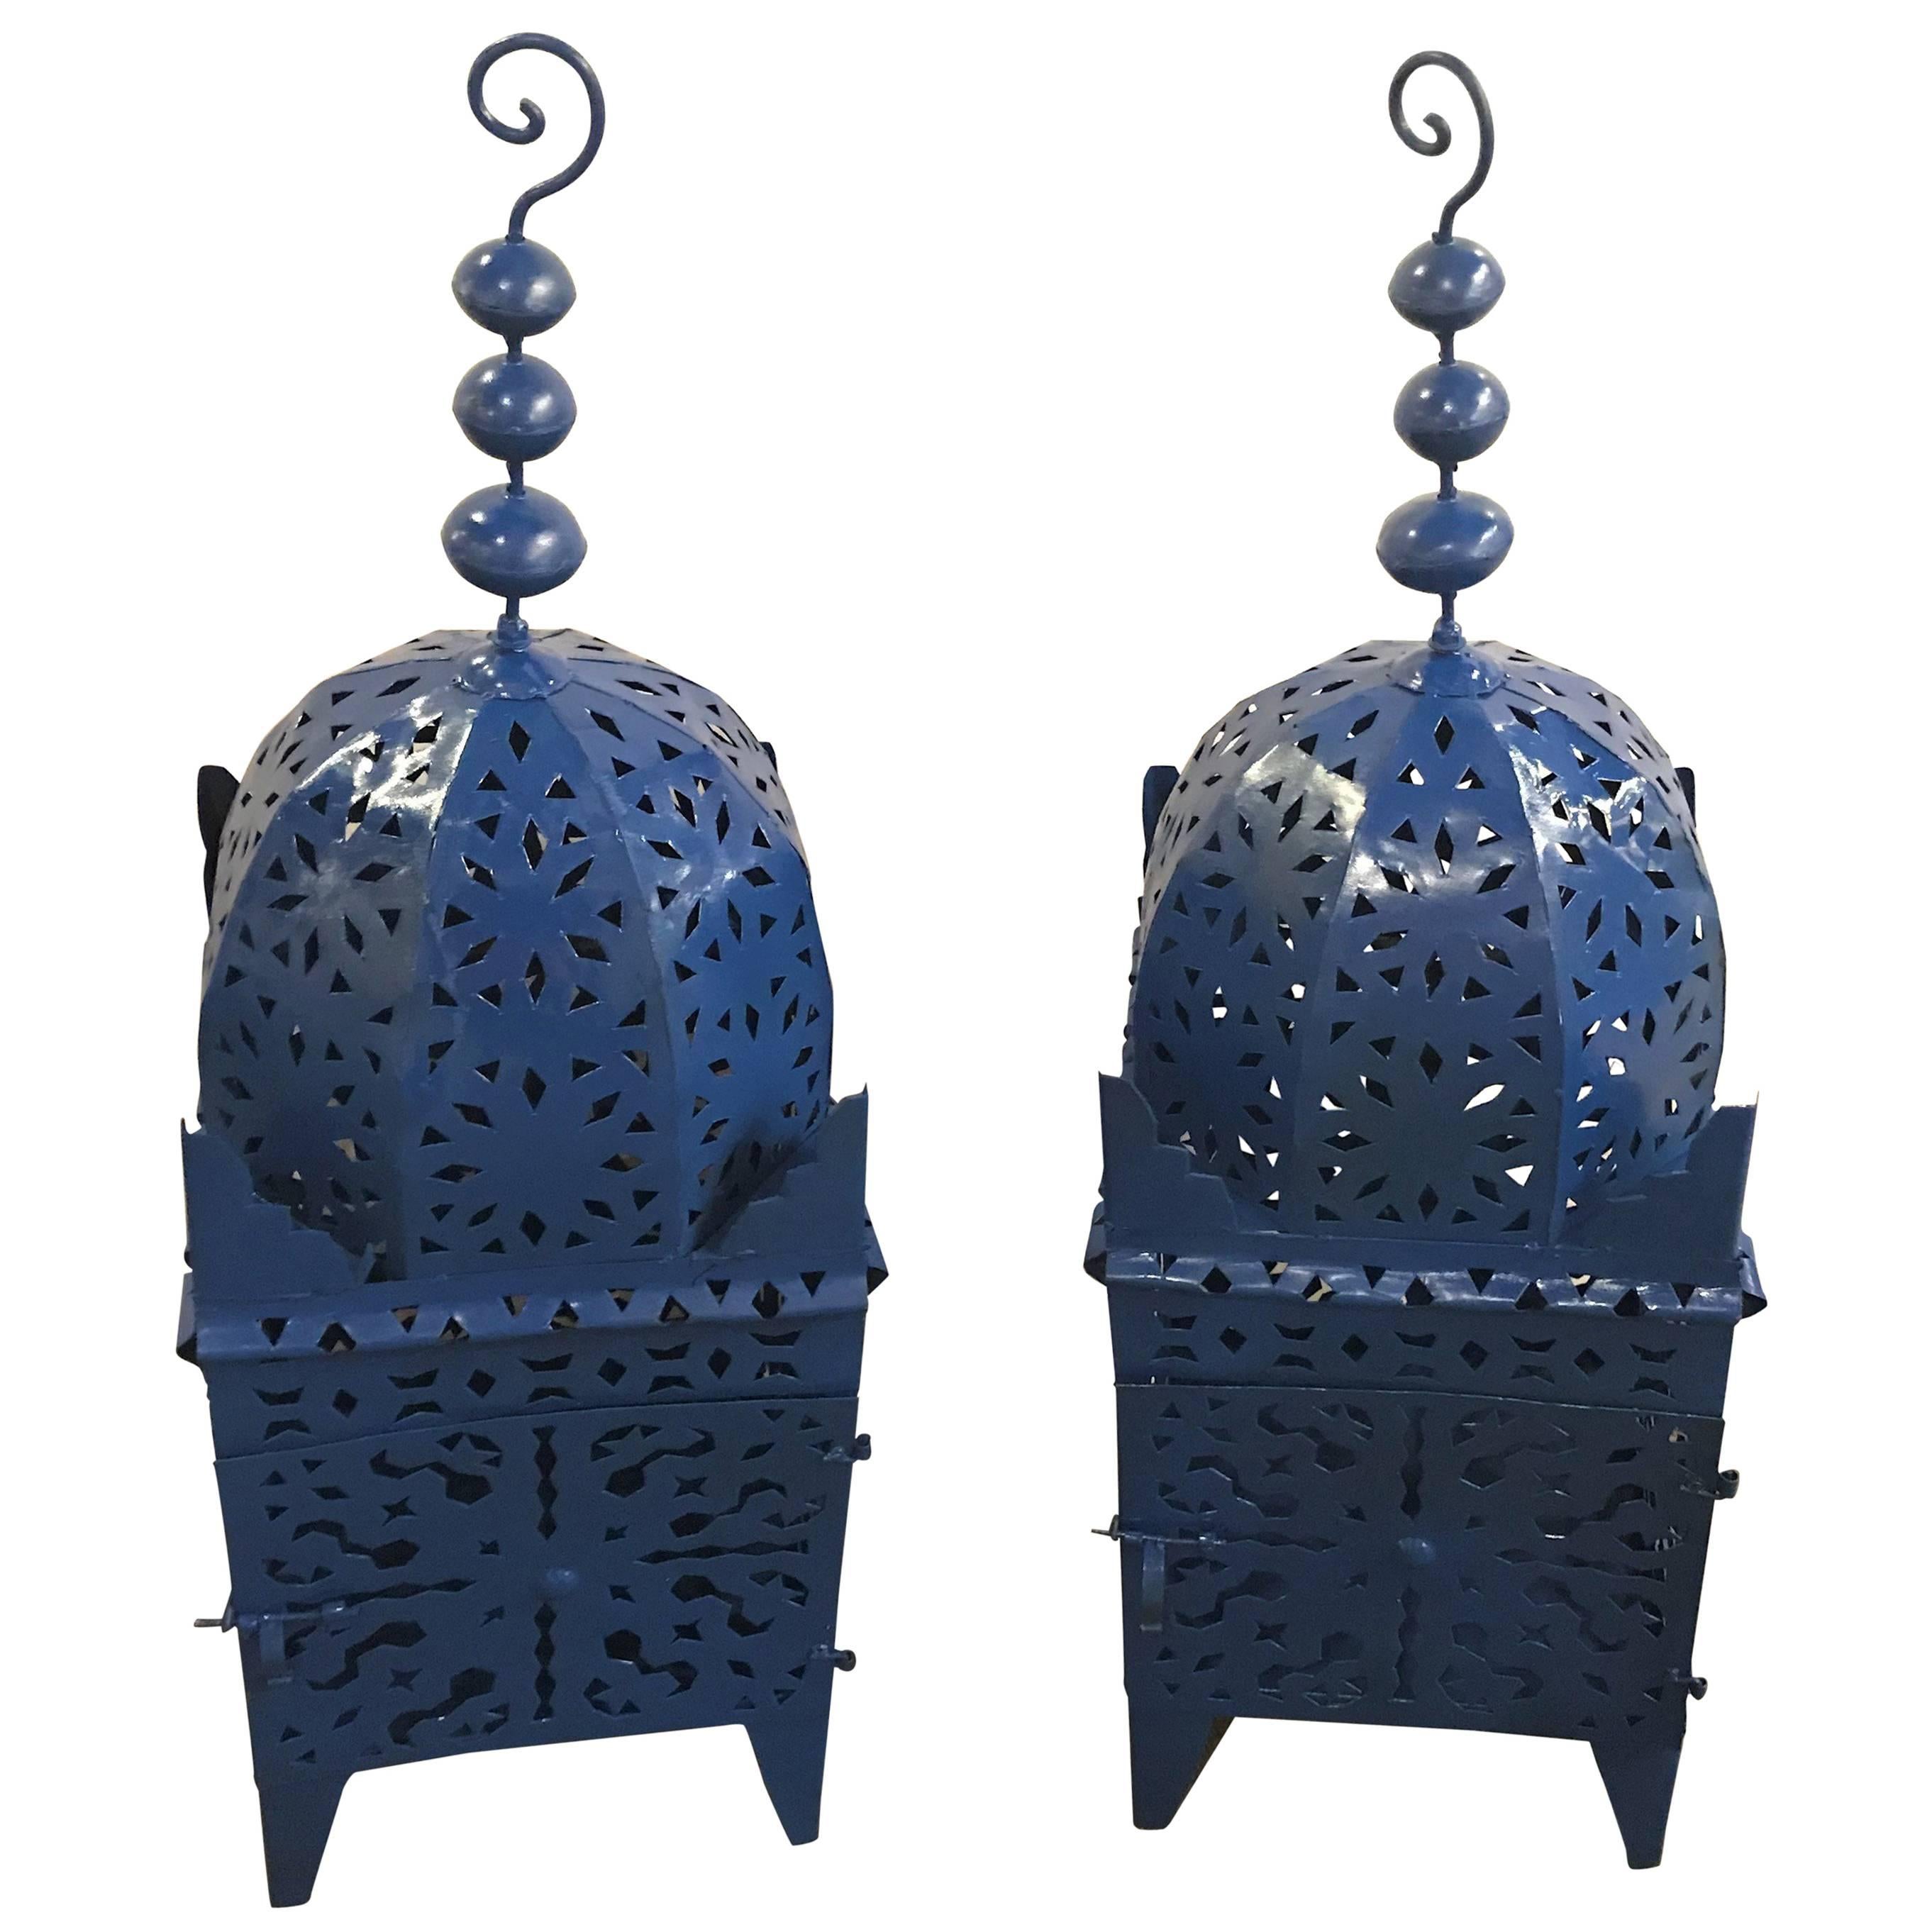 Pair of Moroccan Blue Floor Candle Lanterns